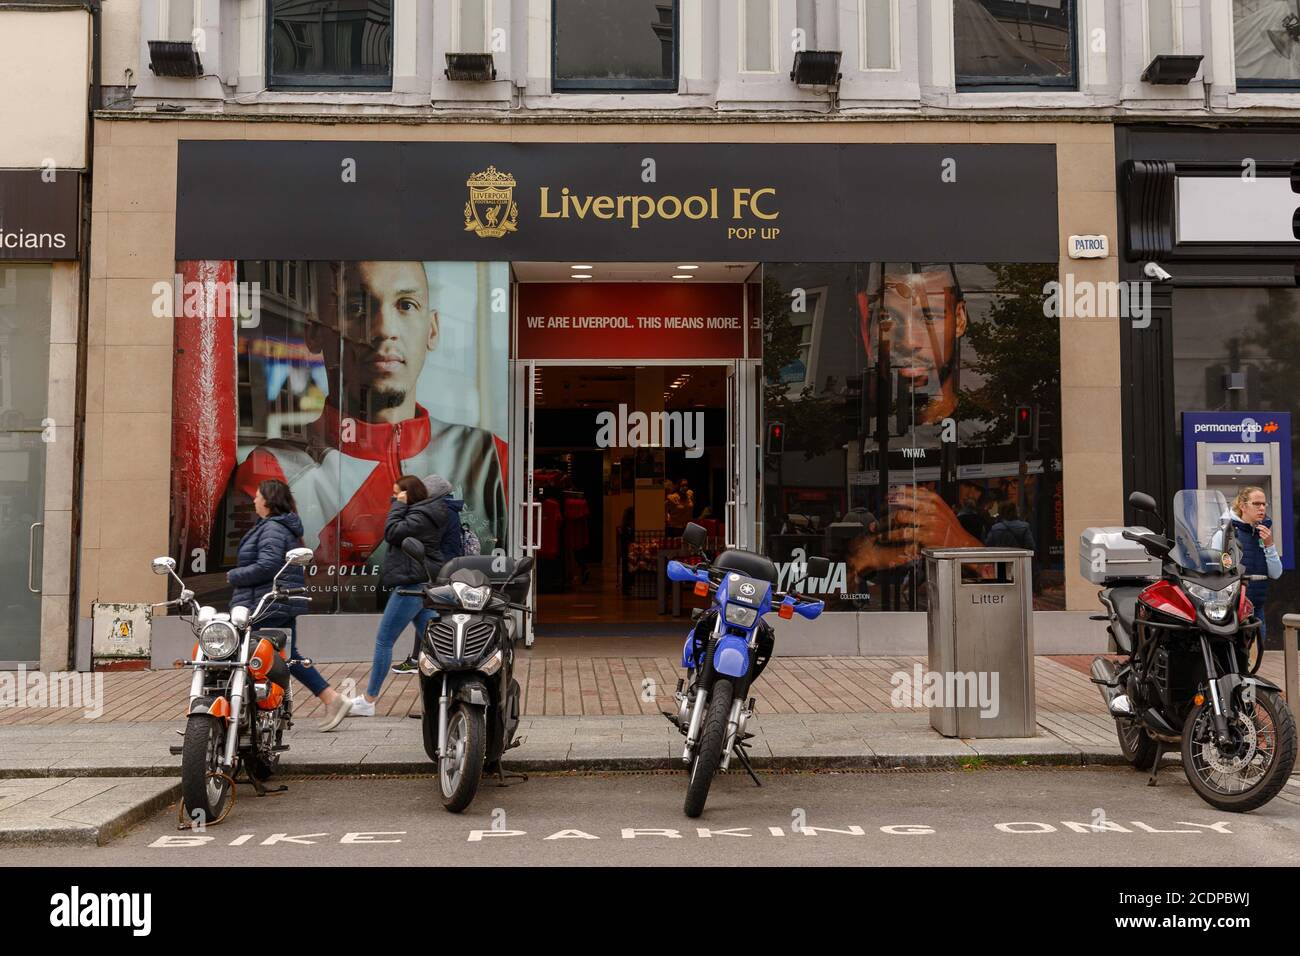 Cork, Ireland. 29th Aug, 2020. Liverpool FC Store Opening, Cork City. A Liverpool FC pop up store opened its doors at 12pm today on St Patrick's Street today. The store is selling the official merchandise of the 2020 Premier League winners. Credit: Damian Coleman/Alamy Live News Stock Photo